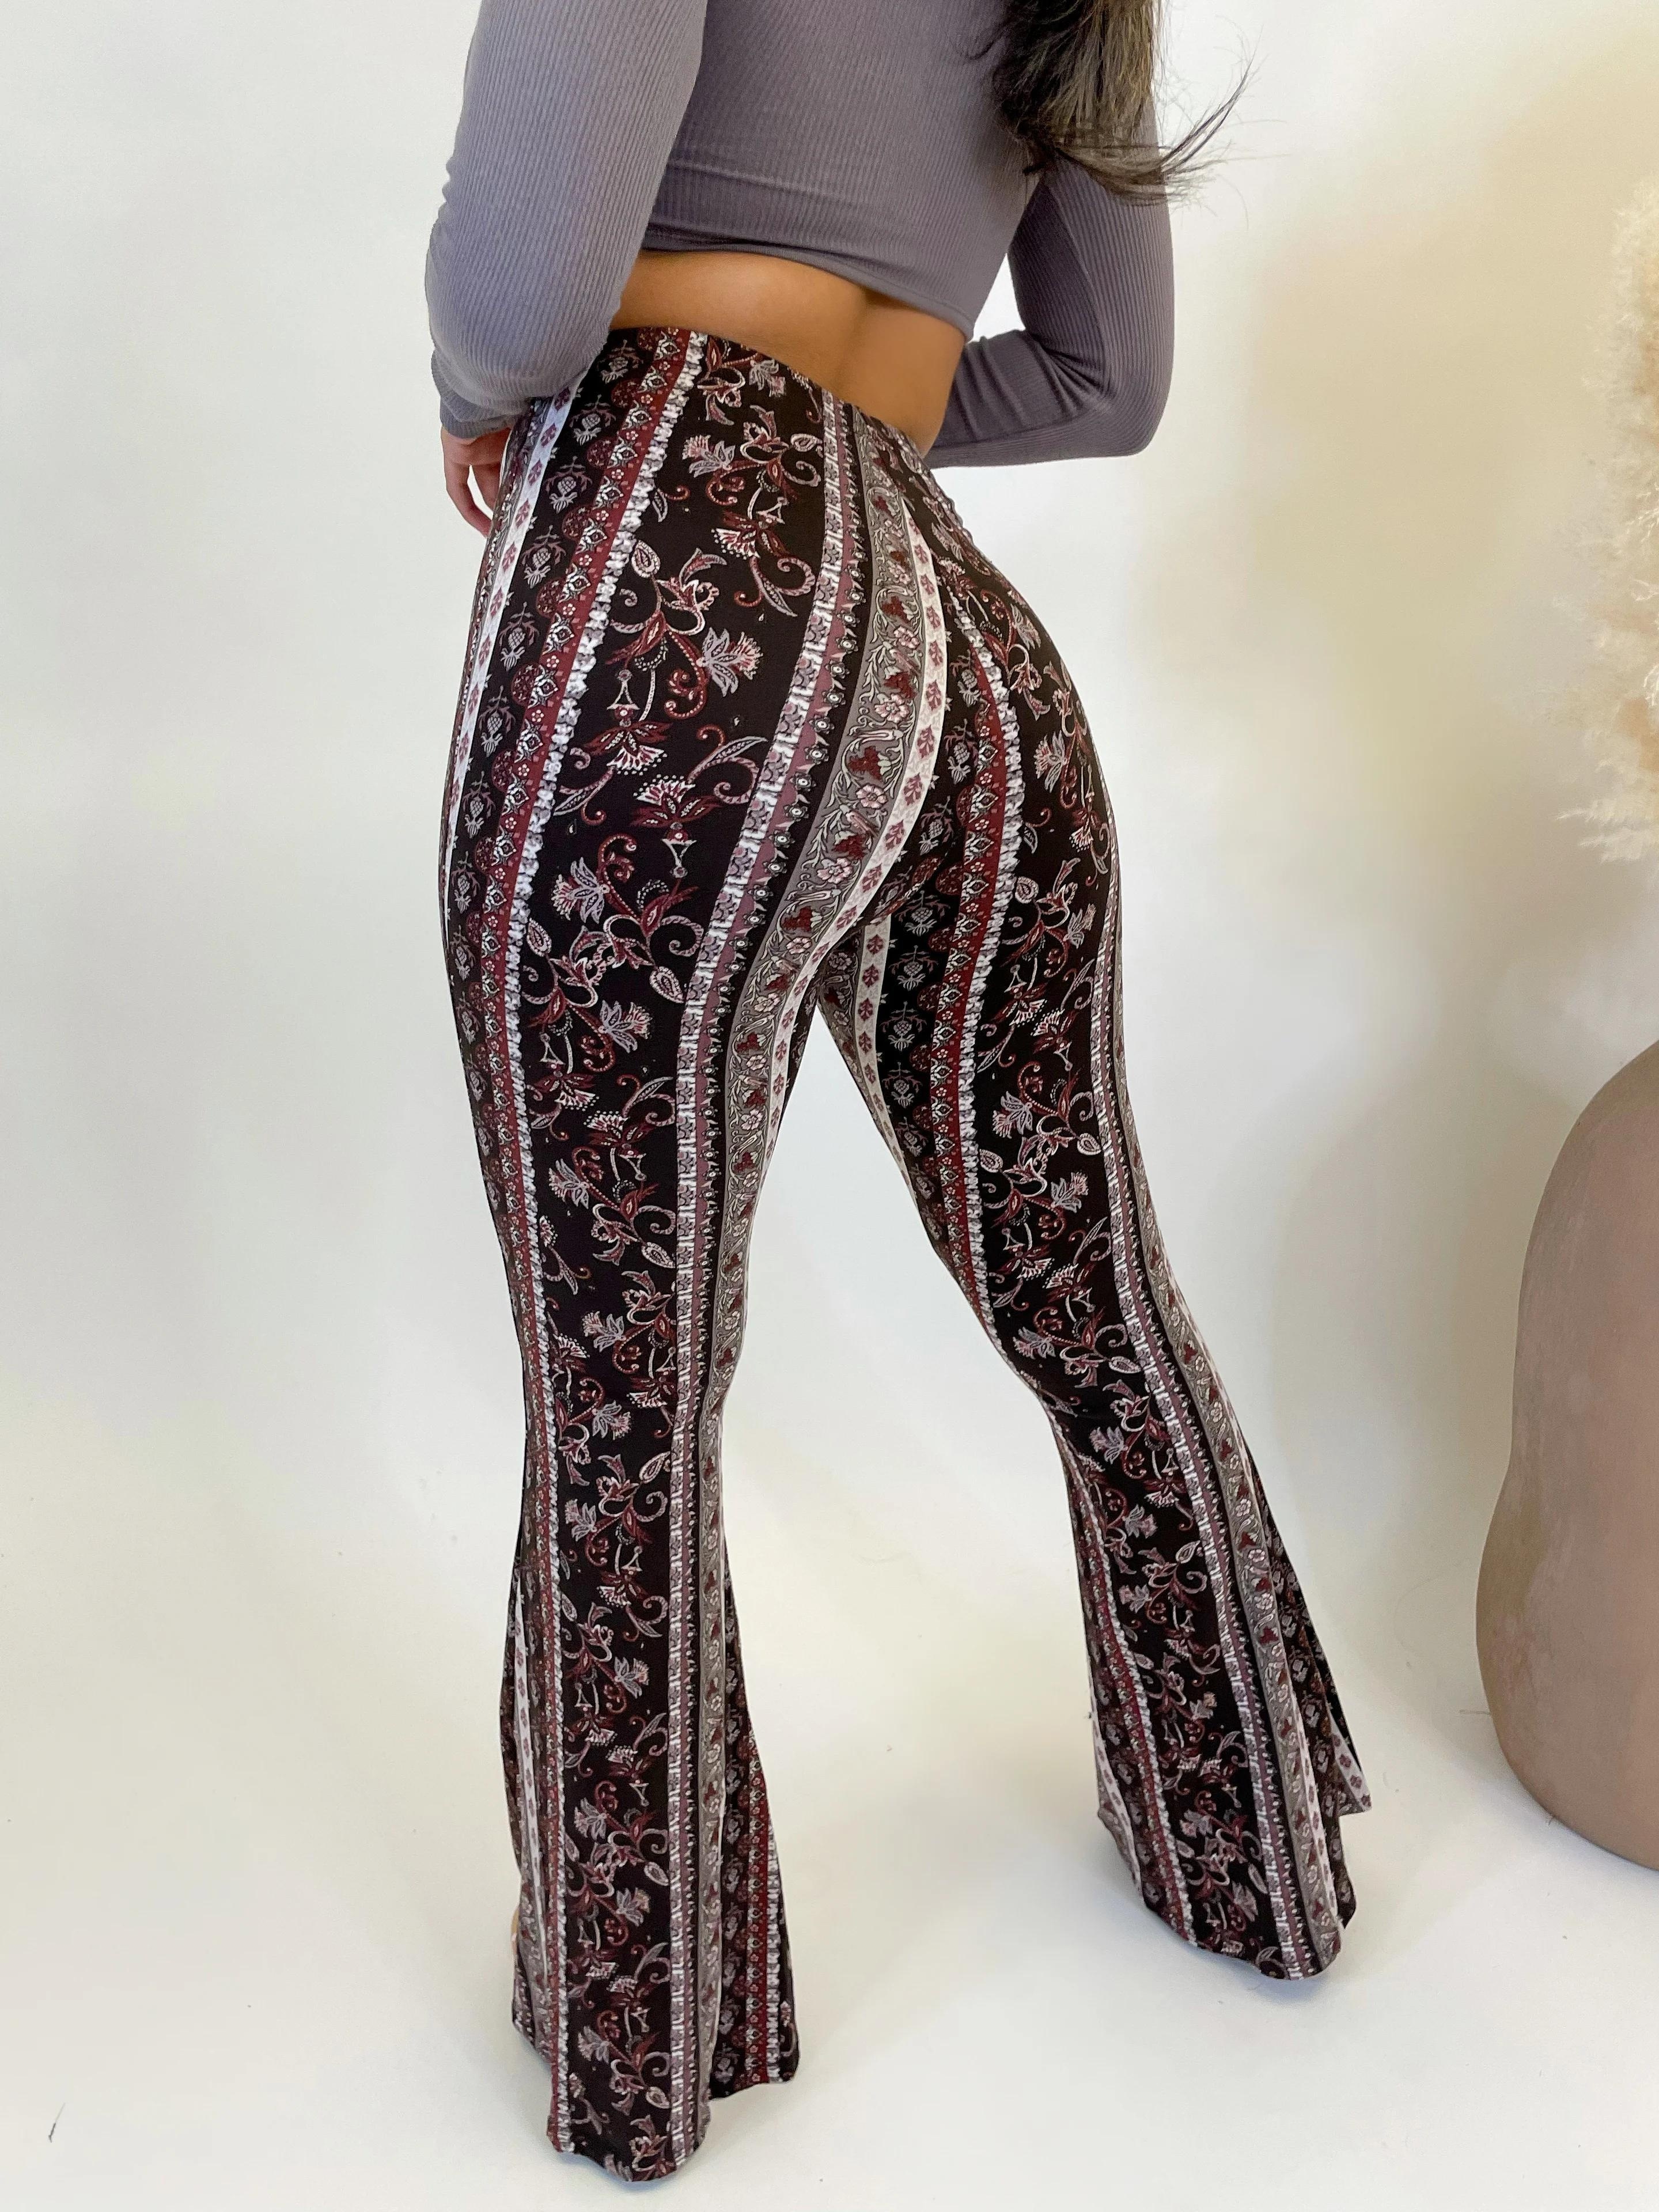 All-over Print High Waisted Pants Size: 4/S